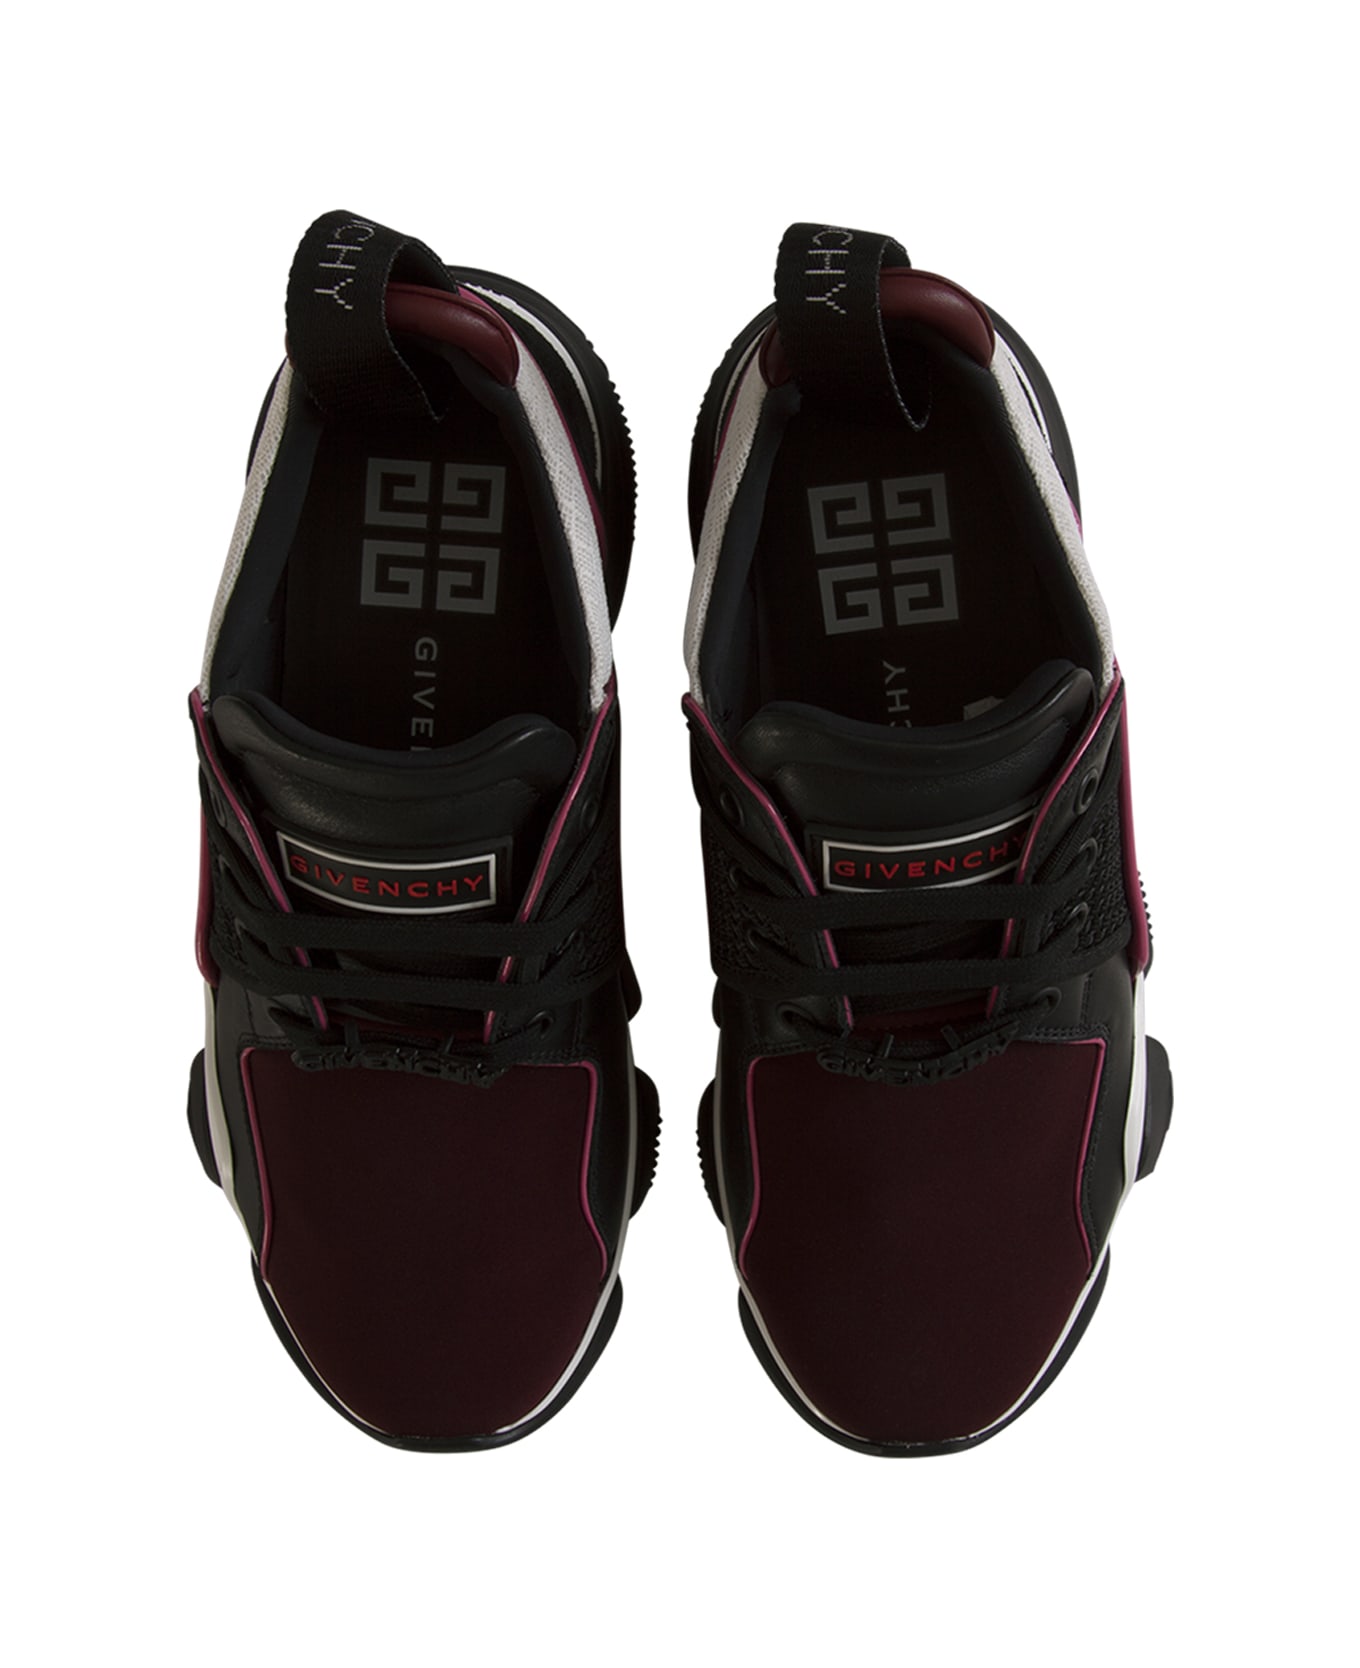 Givenchy Jaw Low Sneakers | italist